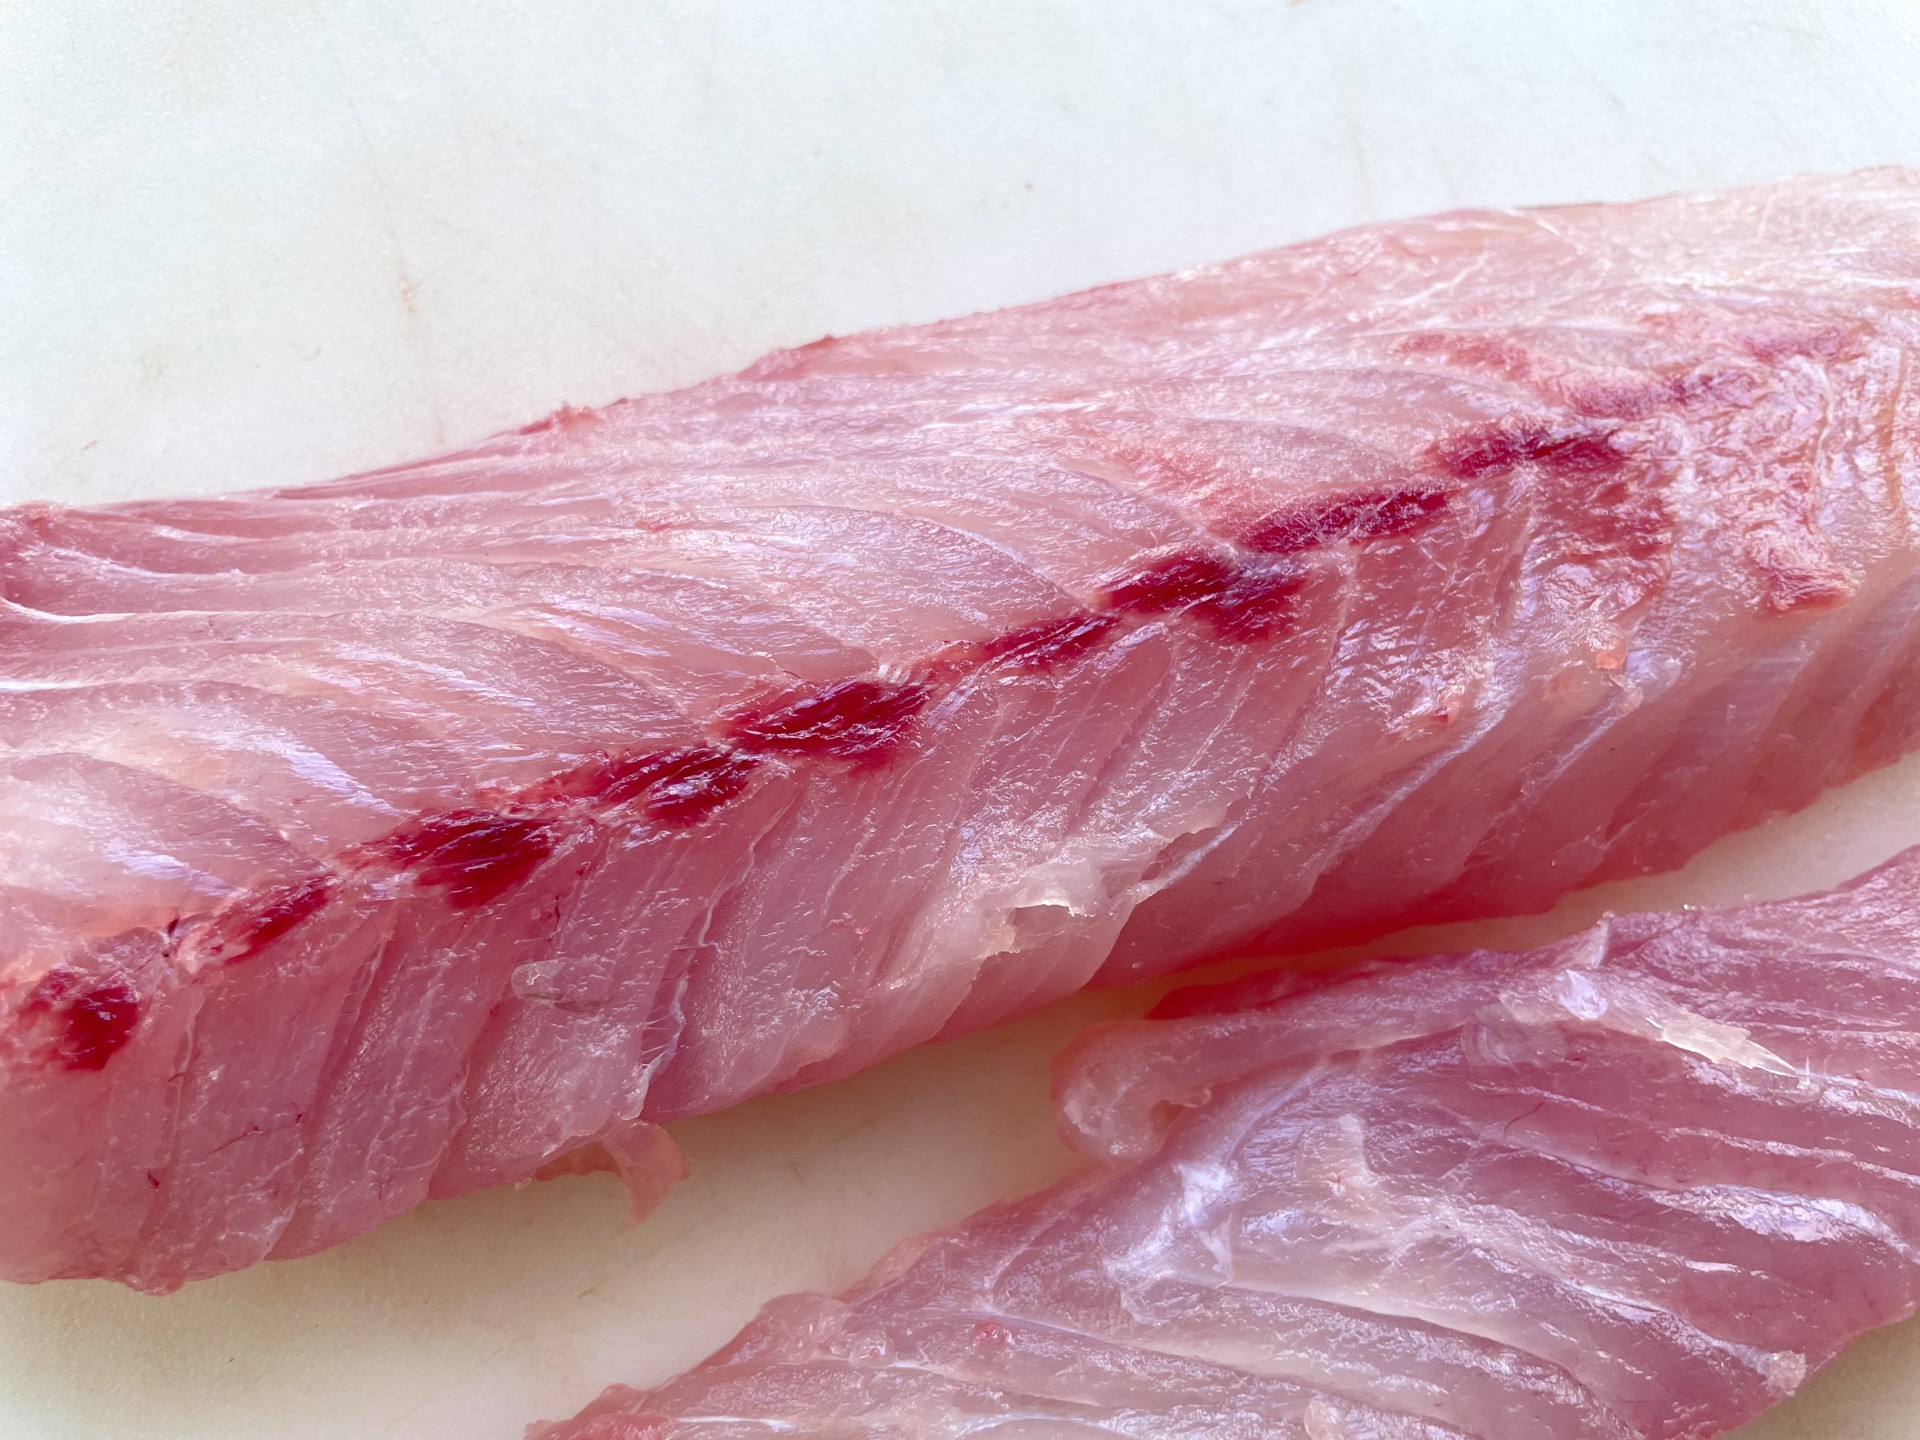 Golden Eye Snapper Arrives at J&C House come to try it. Only one piece.  This is super unique ocean fish for this season. #southvalleysushi  #rivertonsushi, By J&C House